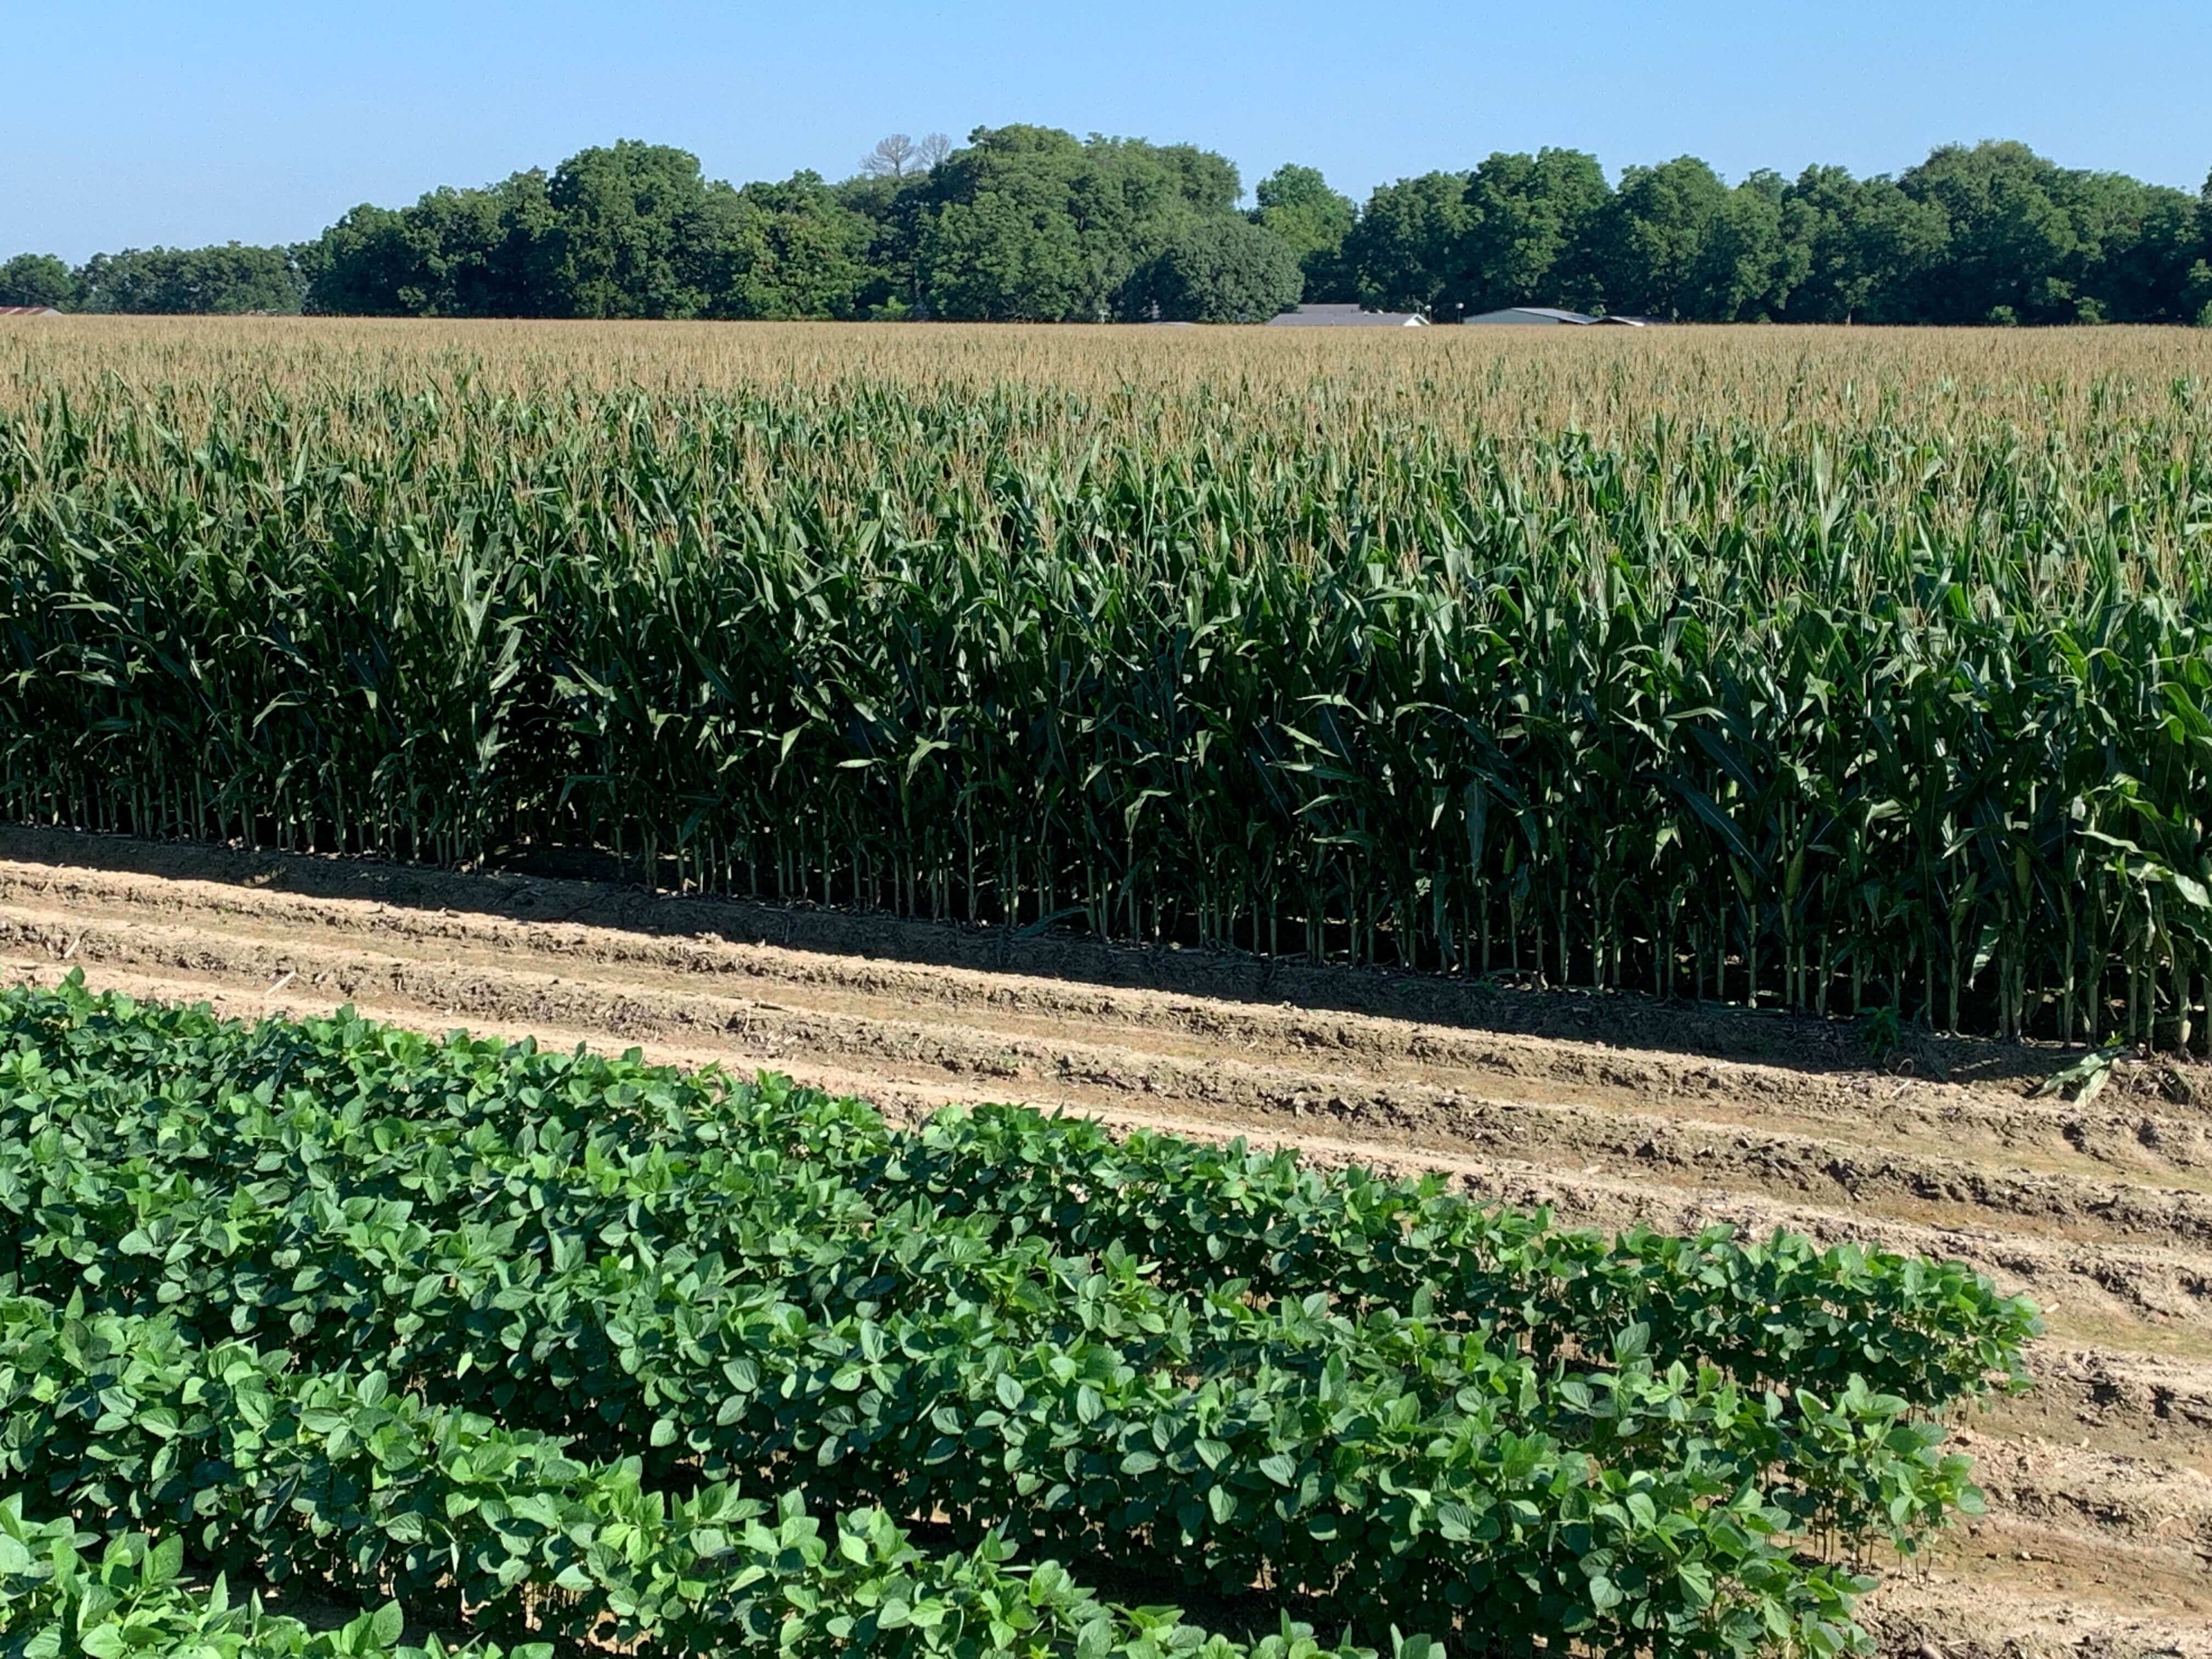 Is Your Corn Primed for a Late Fungicide Application?